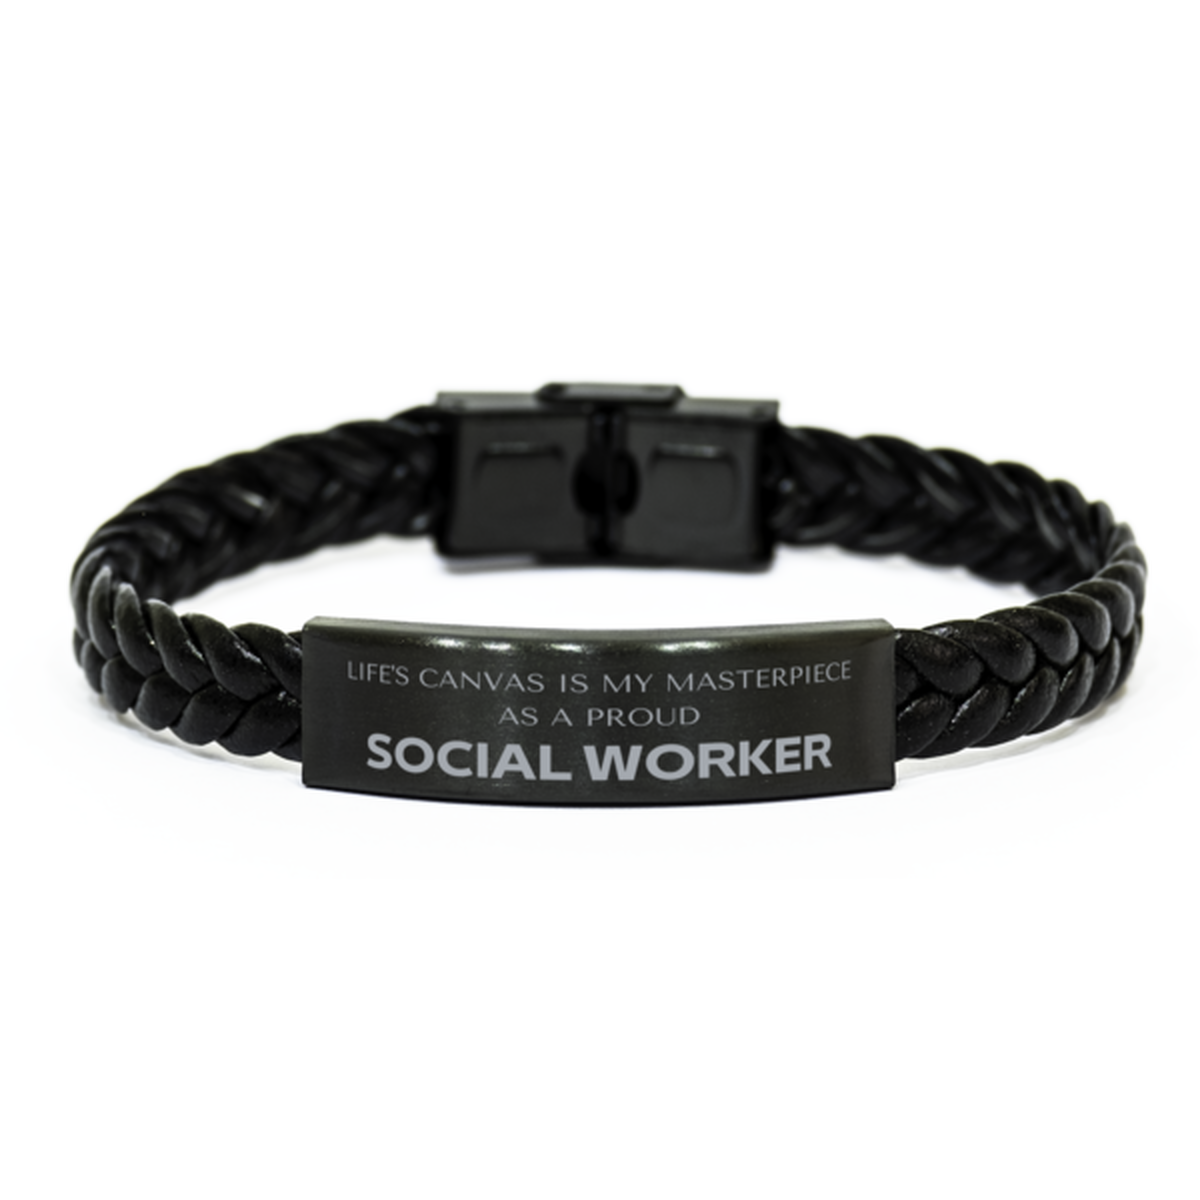 Proud Social Worker Gifts, Life's canvas is my masterpiece, Epic Birthday Christmas Unique Braided Leather Bracelet For Social Worker, Coworkers, Men, Women, Friends